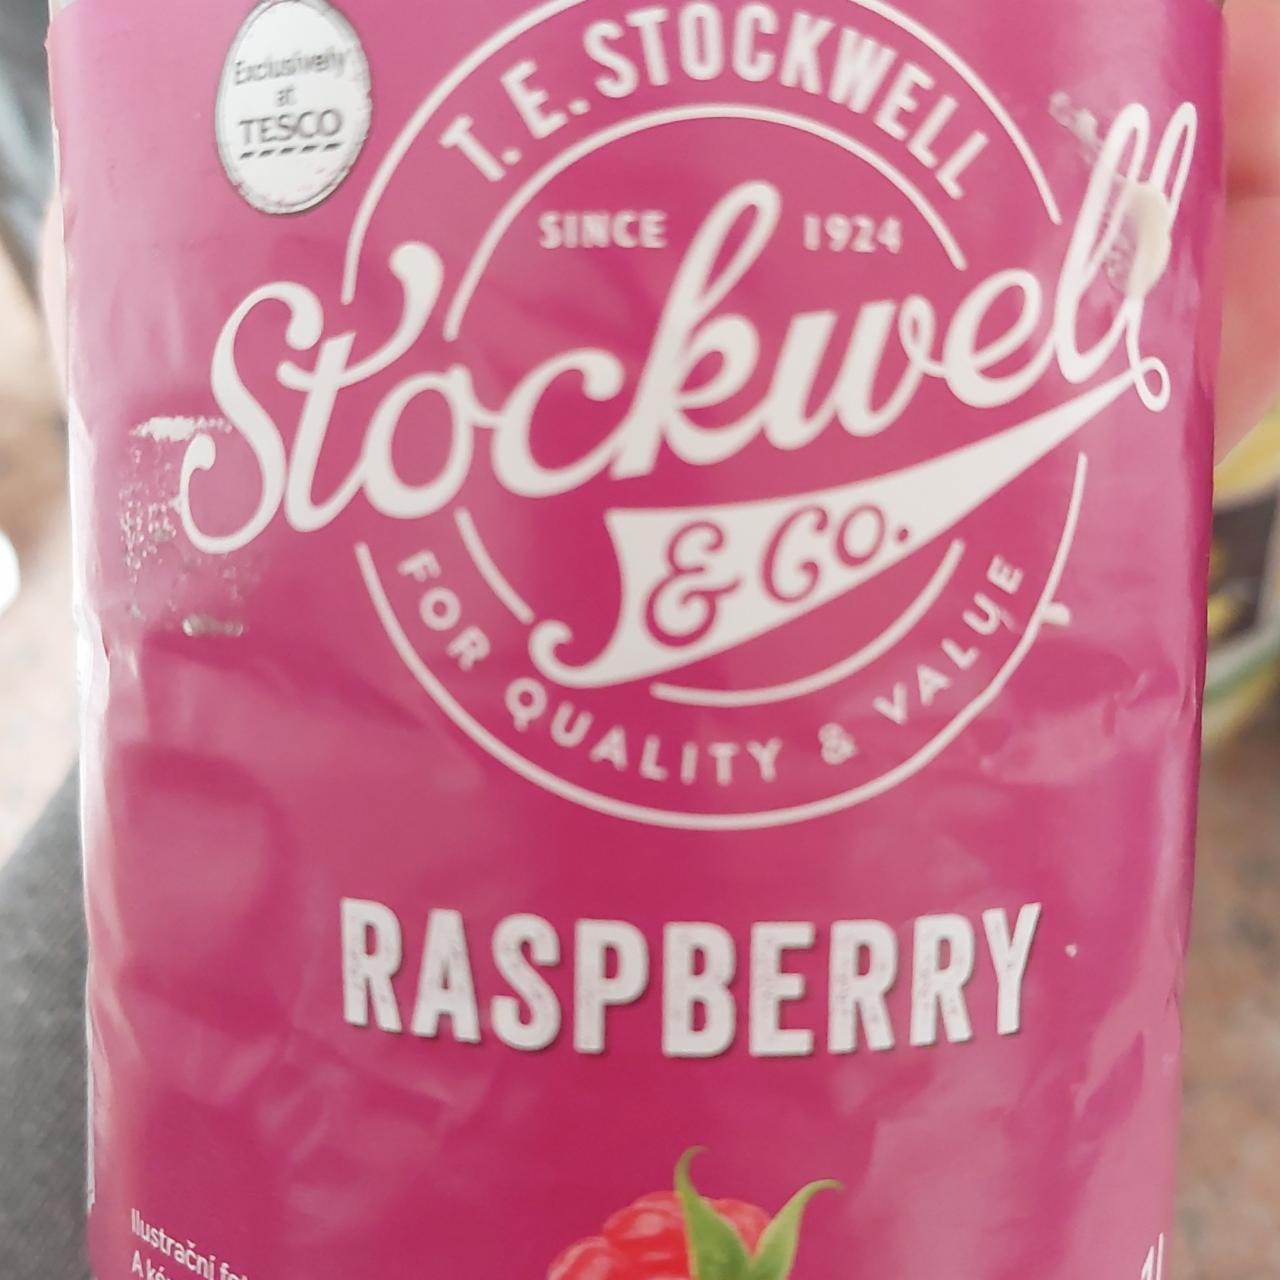 Fotografie - Raspberry Concentrate Stockwell Tesco